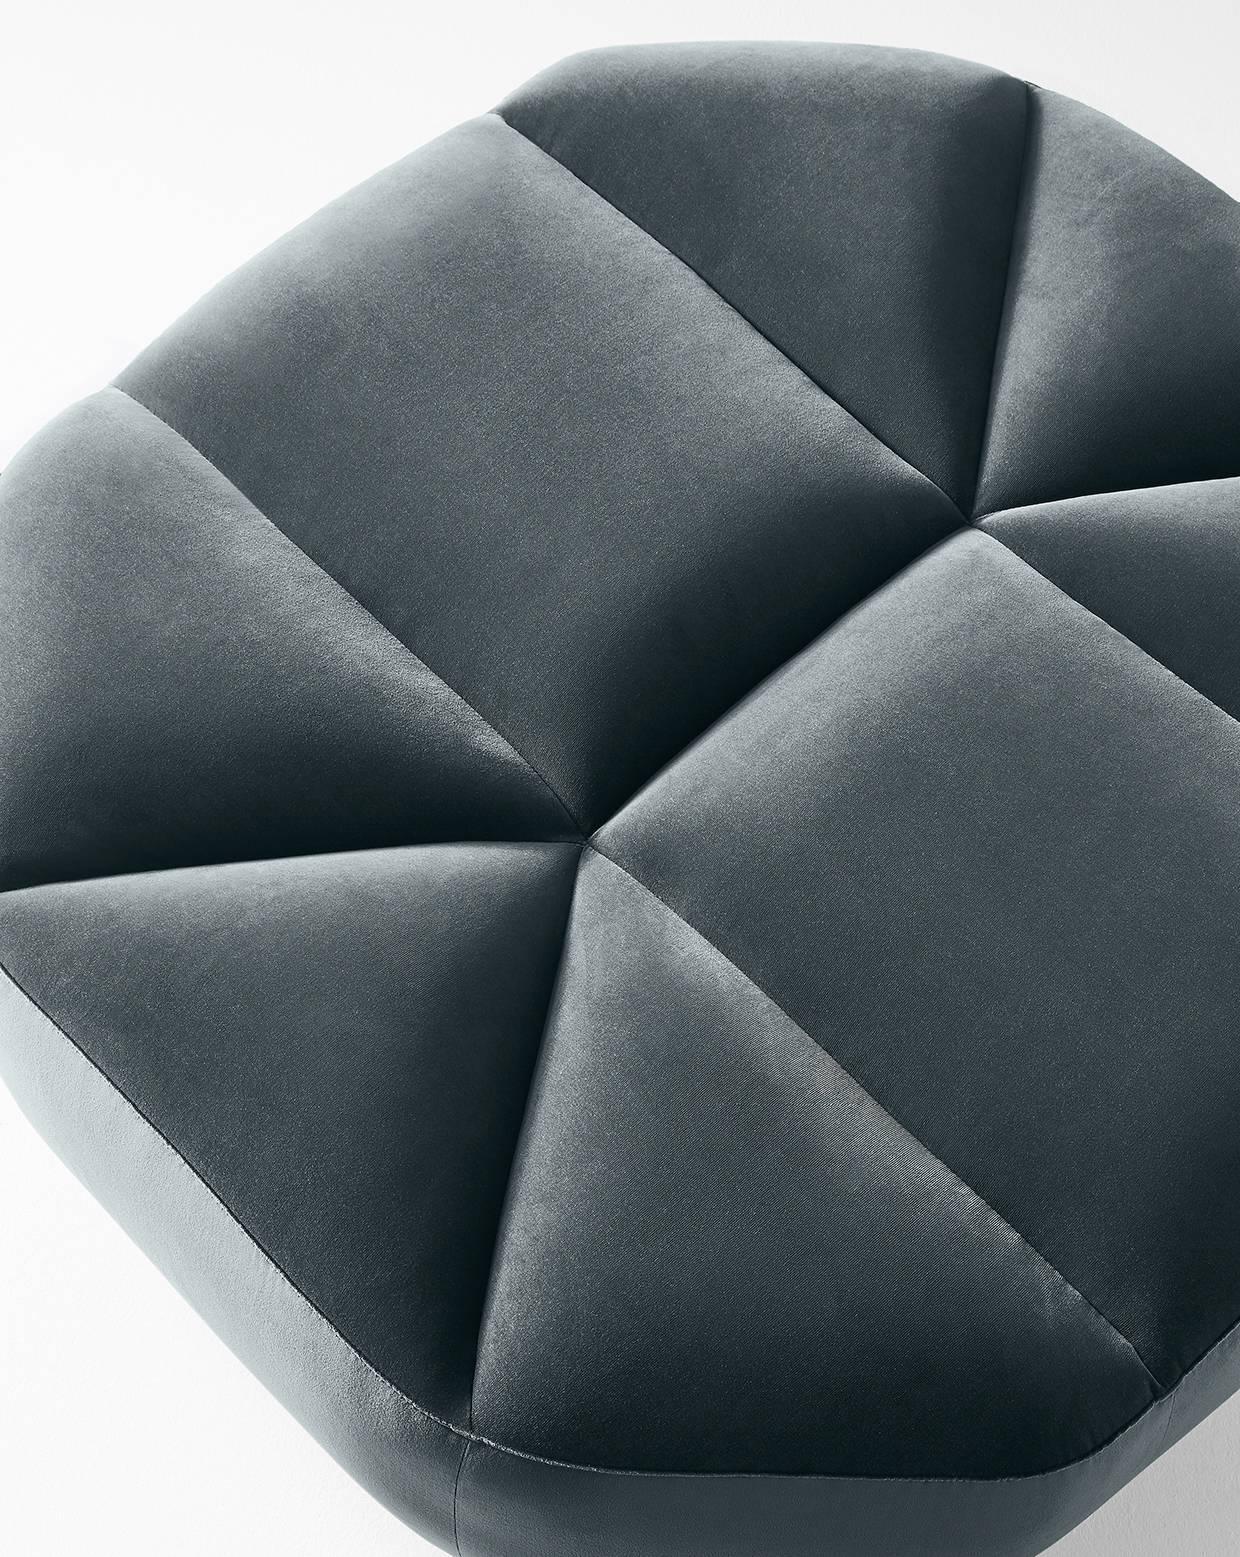 Pouf / Ottoman in non-deformable foam in different density and polyester fibre with wooden inside structure. Black lacquered wooden feet. Available covered by fabric or leather. Part of the Cloud series which includes a sofa and armchair as well.